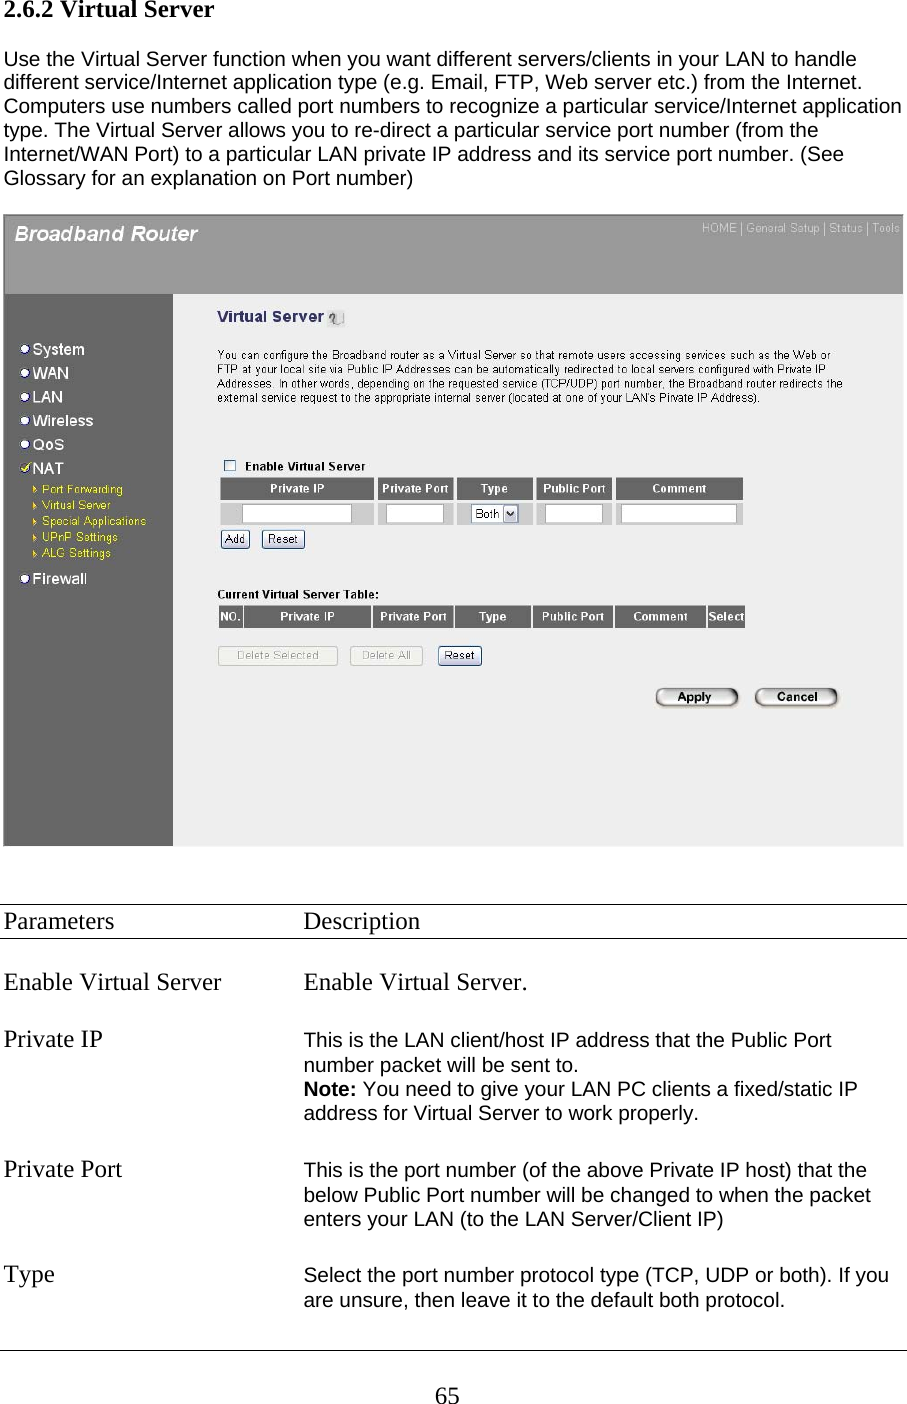 2.6.2 Virtual Server   Use the Virtual Server function when you want different servers/clients in your LAN to handle different service/Internet application type (e.g. Email, FTP, Web server etc.) from the Internet. Computers use numbers called port numbers to recognize a particular service/Internet application type. The Virtual Server allows you to re-direct a particular service port number (from the Internet/WAN Port) to a particular LAN private IP address and its service port number. (See Glossary for an explanation on Port number)     Parameters   Description  Enable Virtual Server  Enable Virtual Server.  Private IP  This is the LAN client/host IP address that the Public Port number packet will be sent to.   Note: You need to give your LAN PC clients a fixed/static IP address for Virtual Server to work properly.  Private Port  This is the port number (of the above Private IP host) that the below Public Port number will be changed to when the packet enters your LAN (to the LAN Server/Client IP)  Type  Select the port number protocol type (TCP, UDP or both). If you are unsure, then leave it to the default both protocol.   65